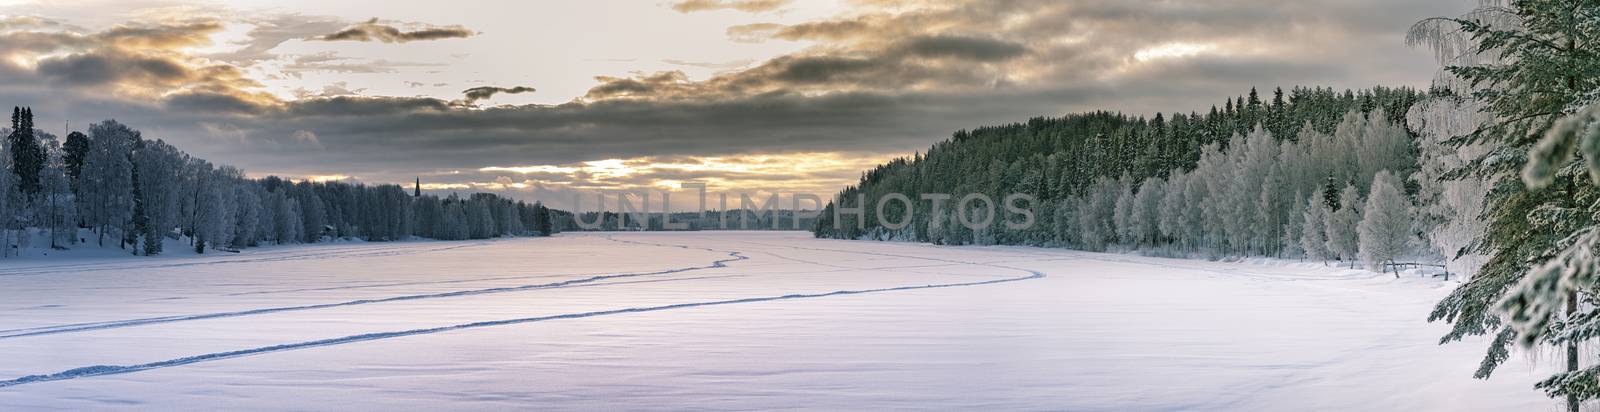 Sunset panorama over winter forest at sides and frozen river in the middle. Typical Northern Sweden landscape - birch and spruce tree covered by hoarfrost - very cold day, Lappland, Sweden by skydreamliner